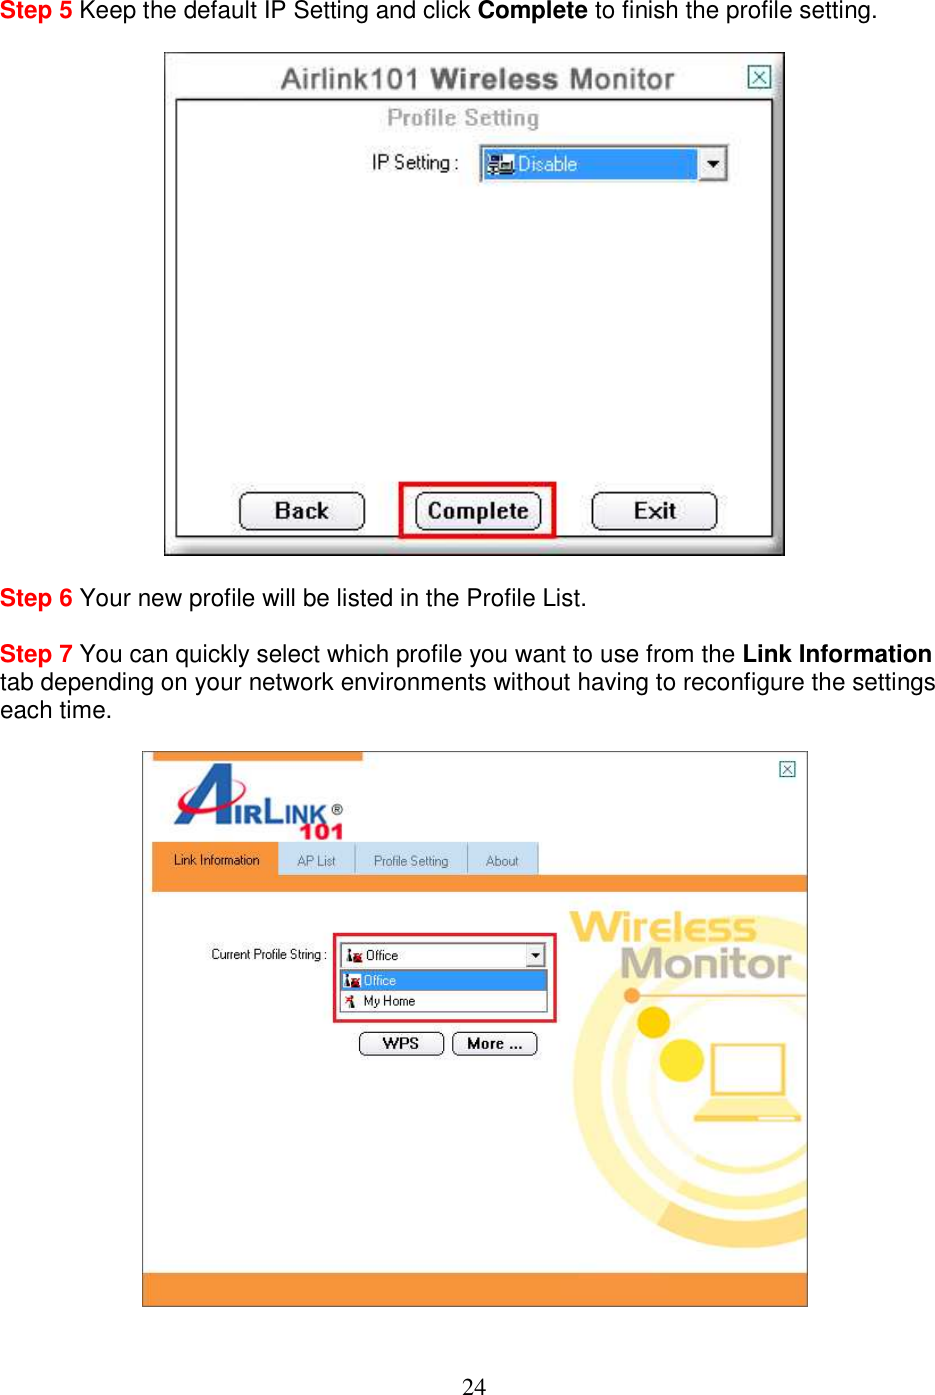 24 Step 5 Keep the default IP Setting and click Complete to finish the profile setting.    Step 6 Your new profile will be listed in the Profile List.  Step 7 You can quickly select which profile you want to use from the Link Information tab depending on your network environments without having to reconfigure the settings each time.    